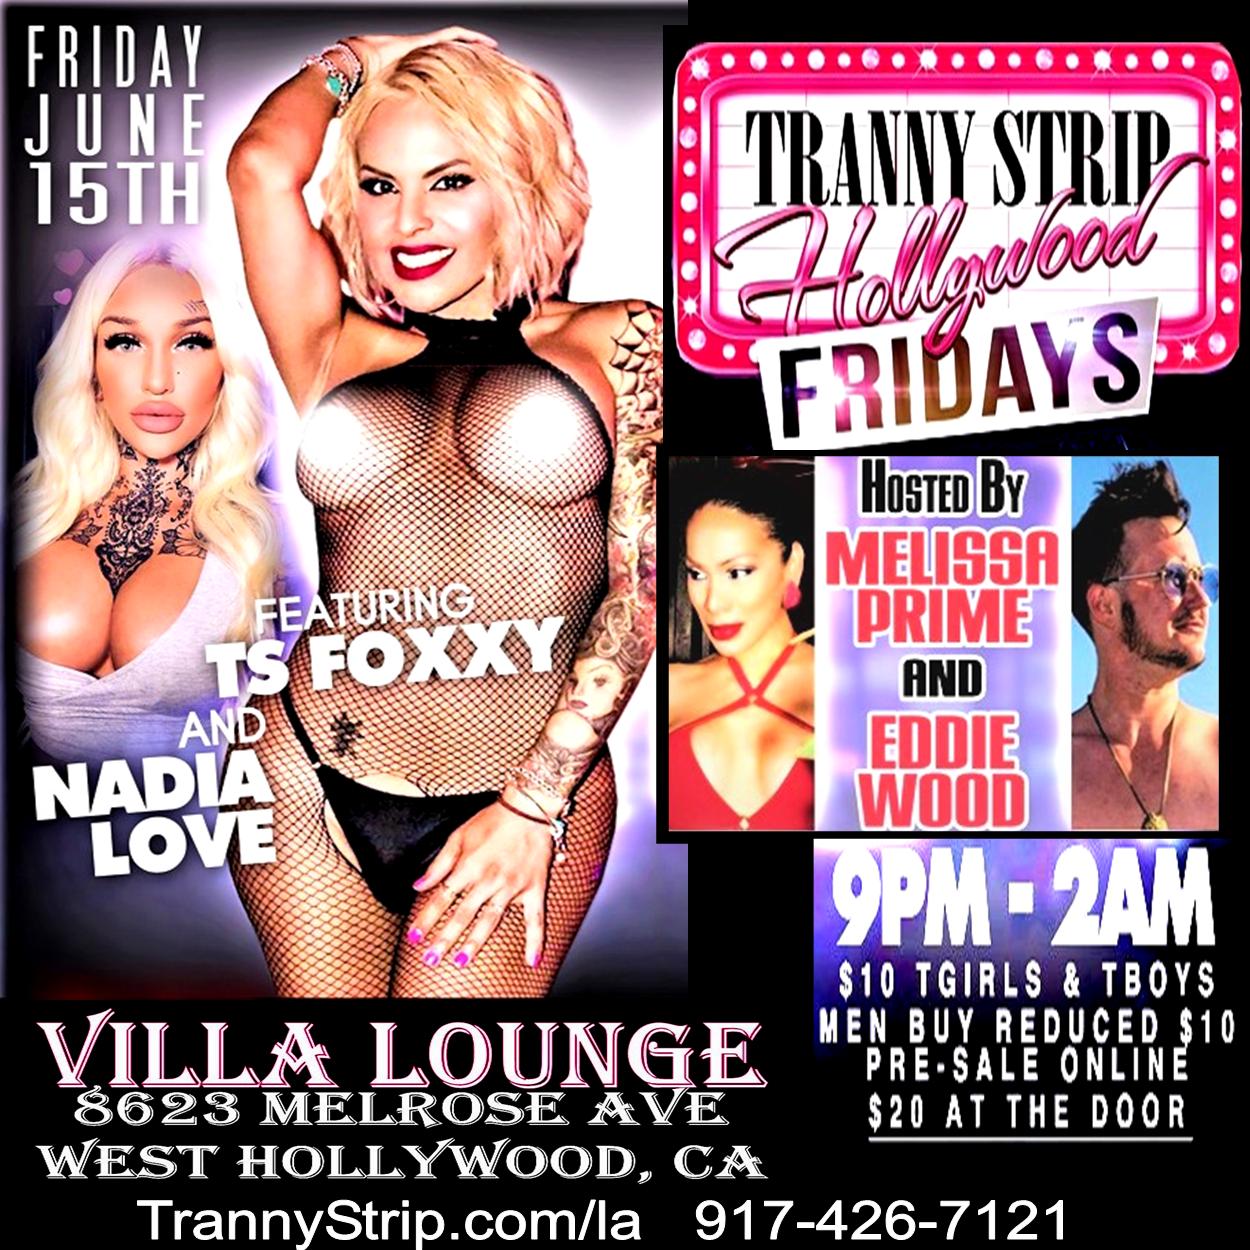 “Foxxy’s star appearance at Tranny Strip this Friday June 15th in Hollywood”